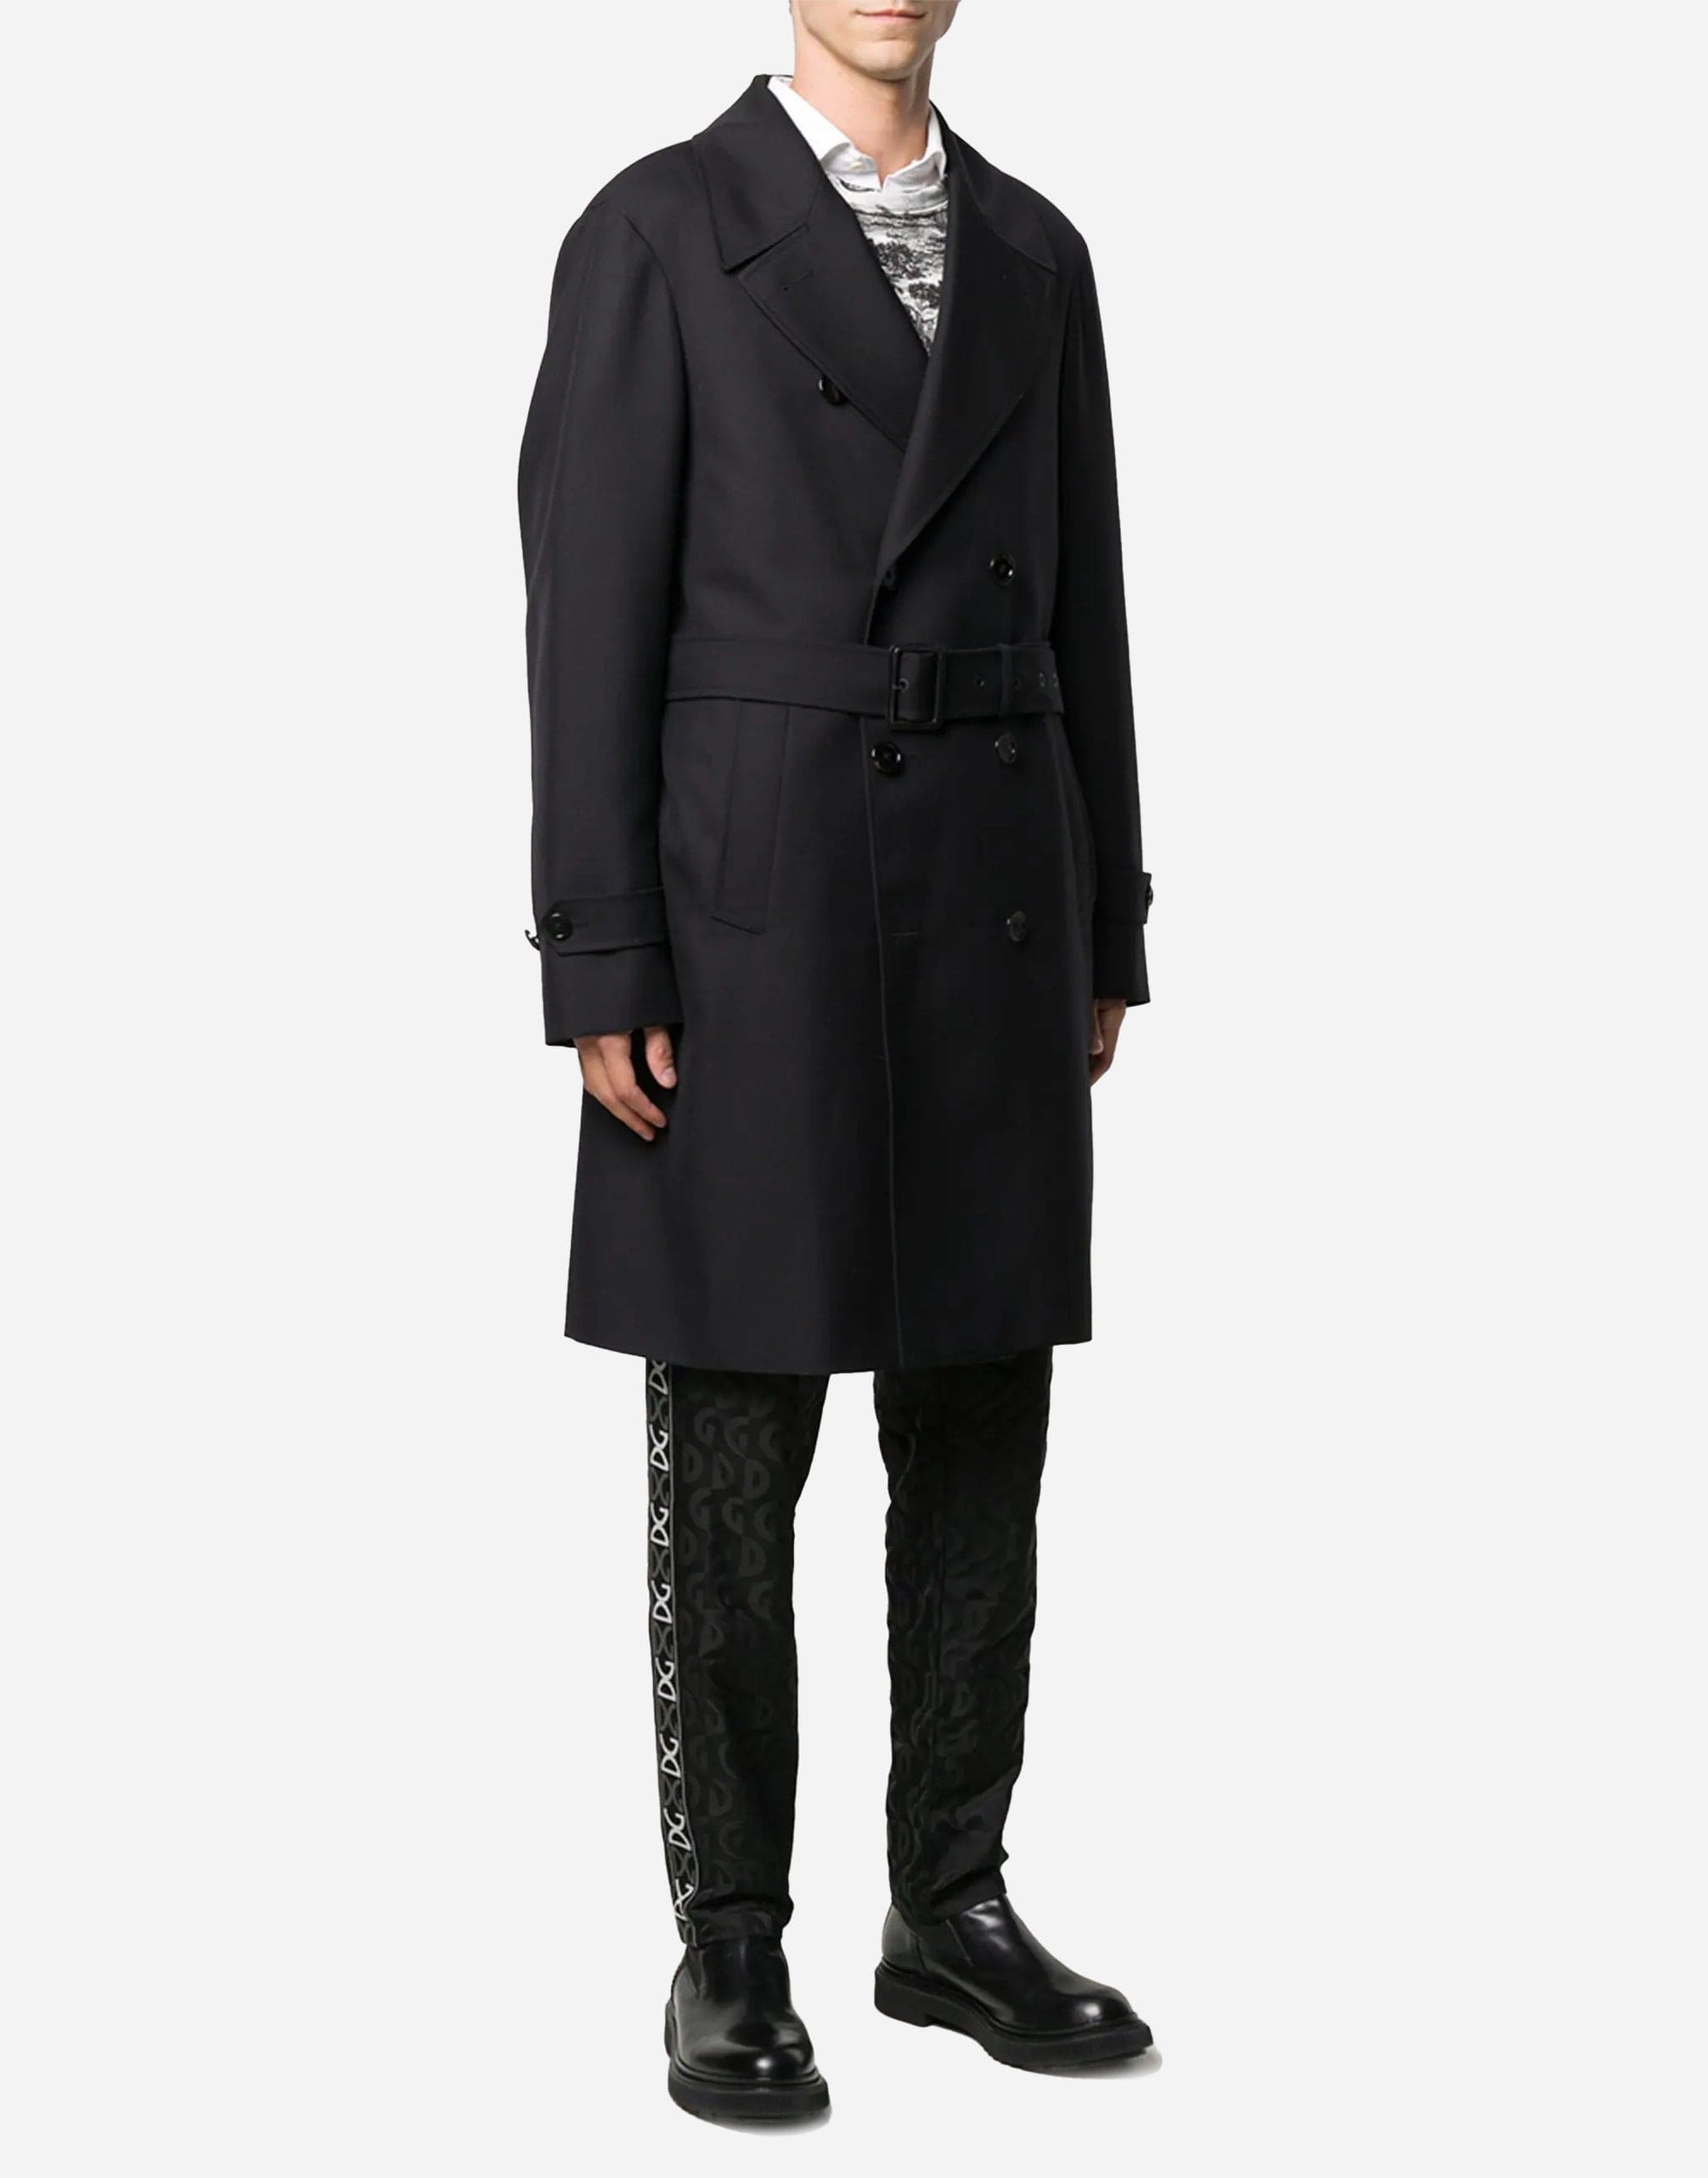 Dolce & Gabbana Belted Trench Coat